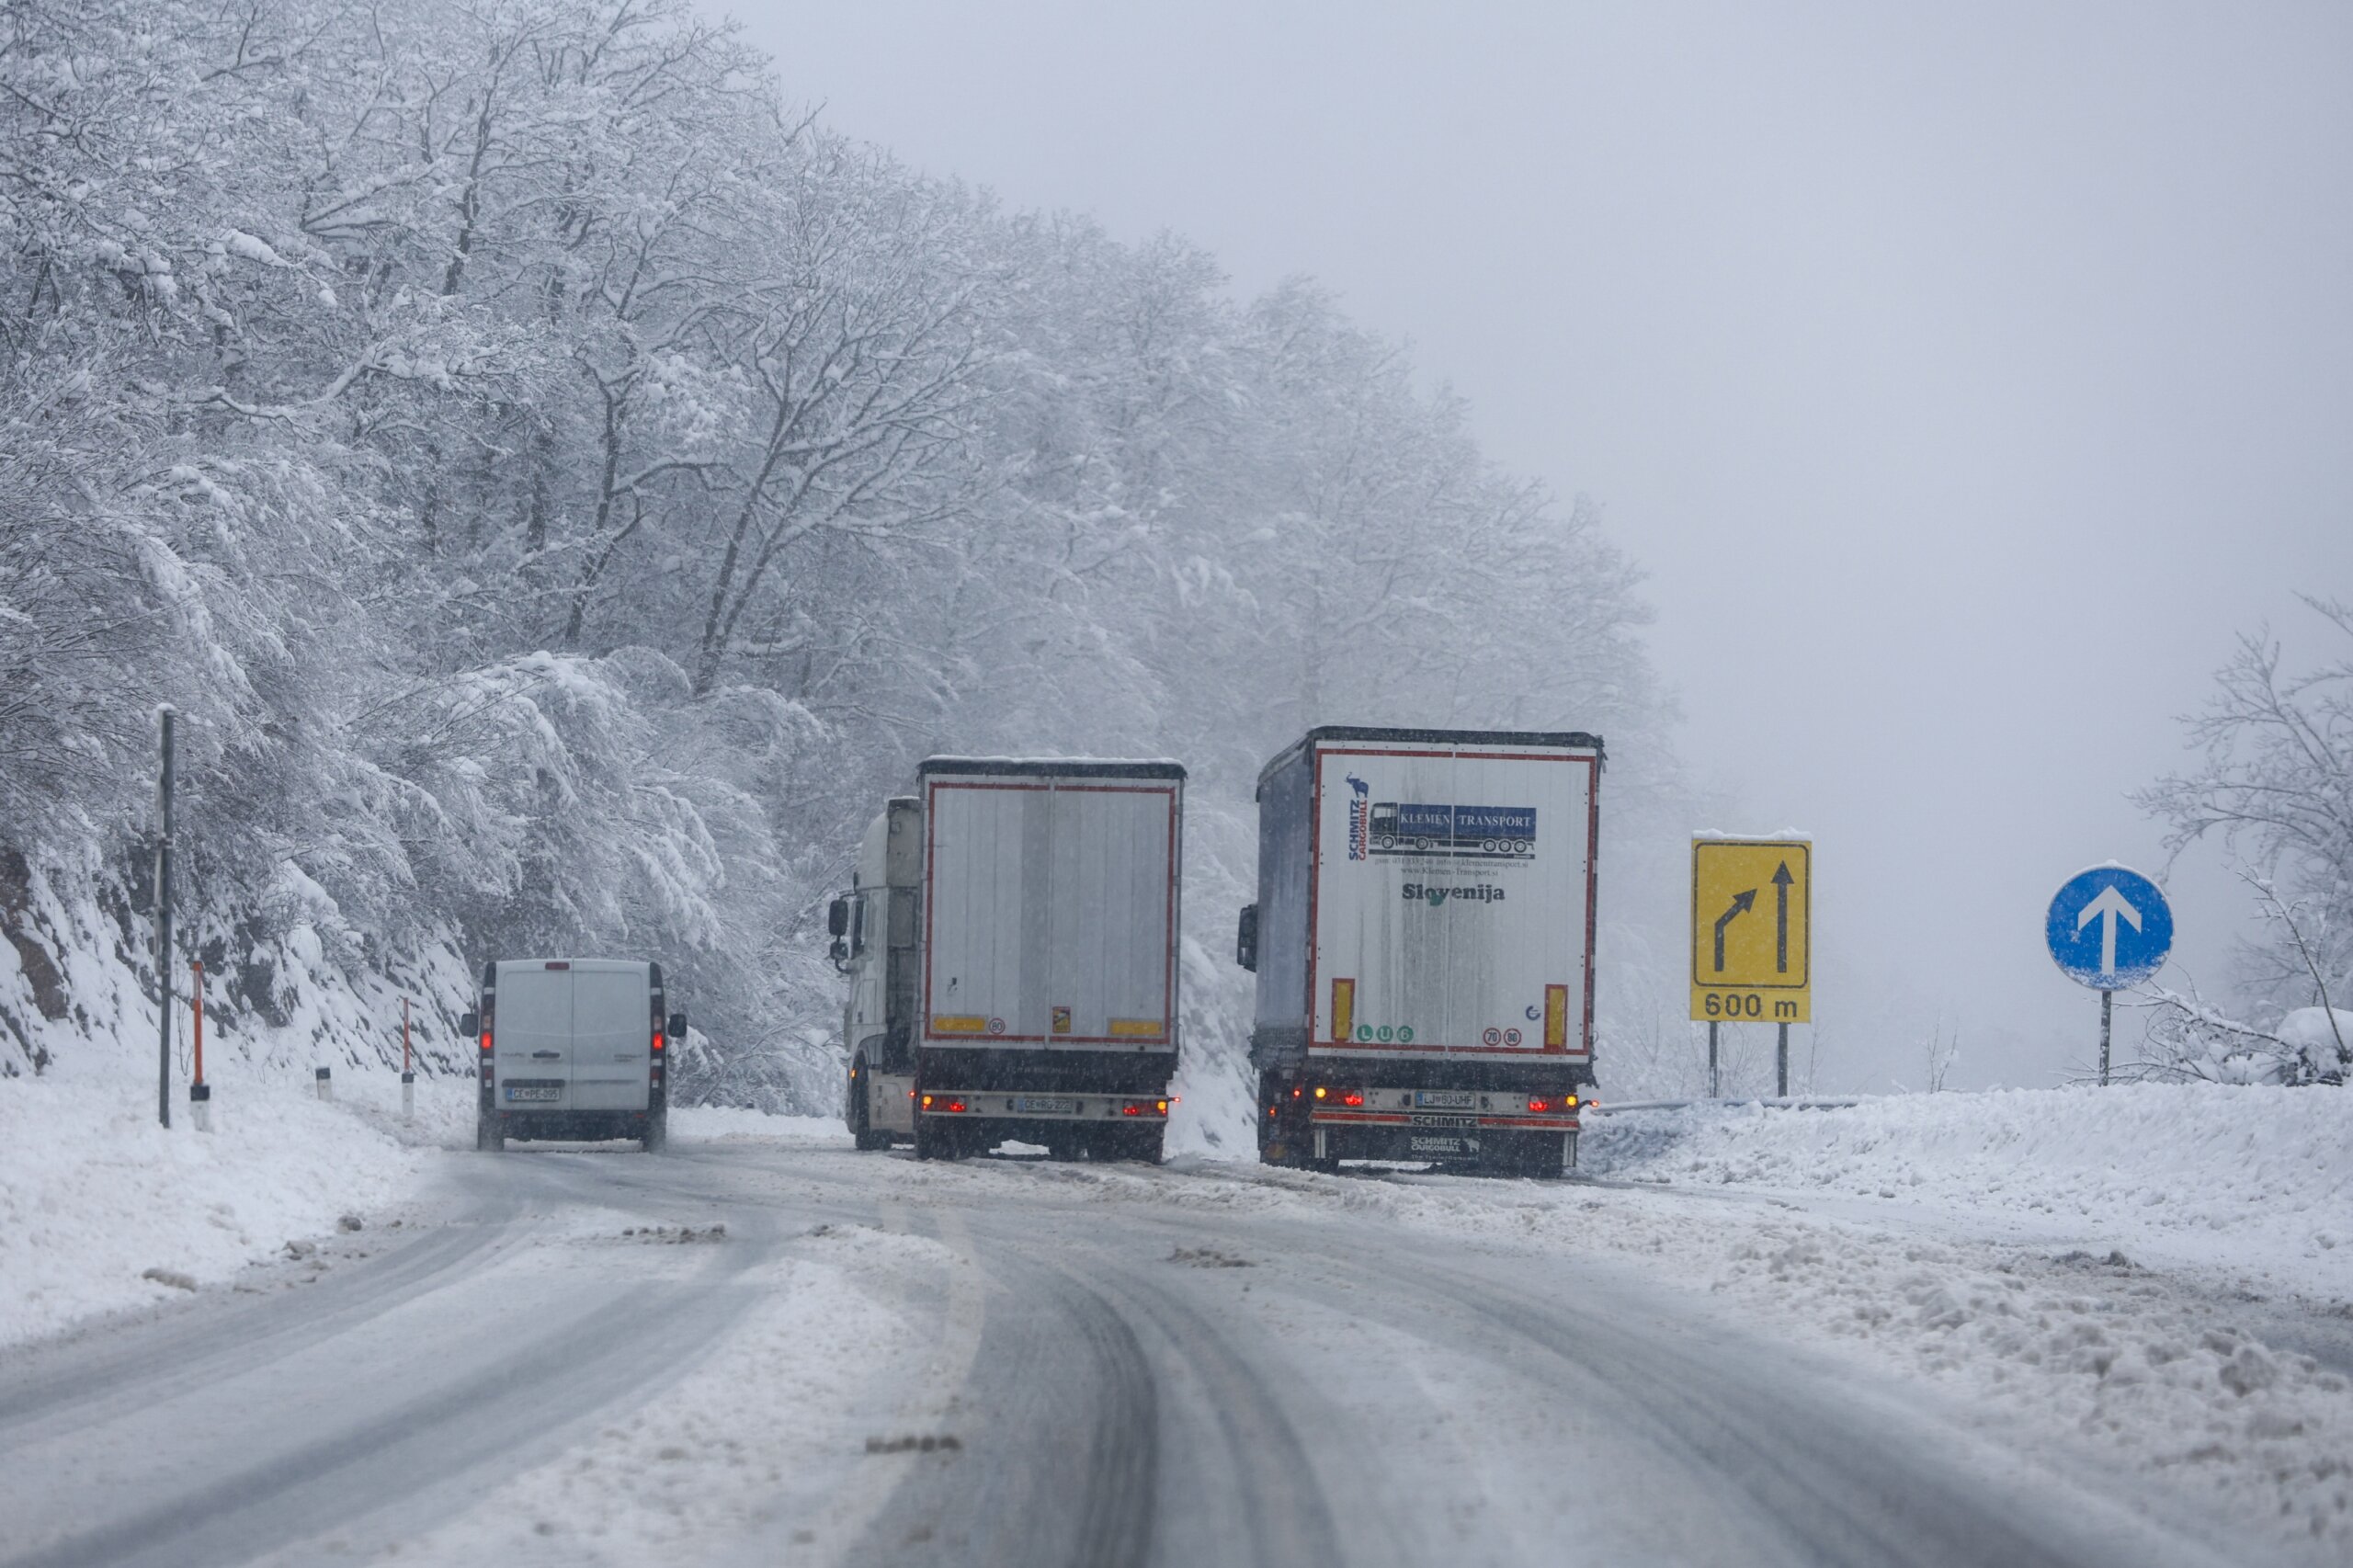 Snow, winds cause traffic chaos, power cuts in Slovenia